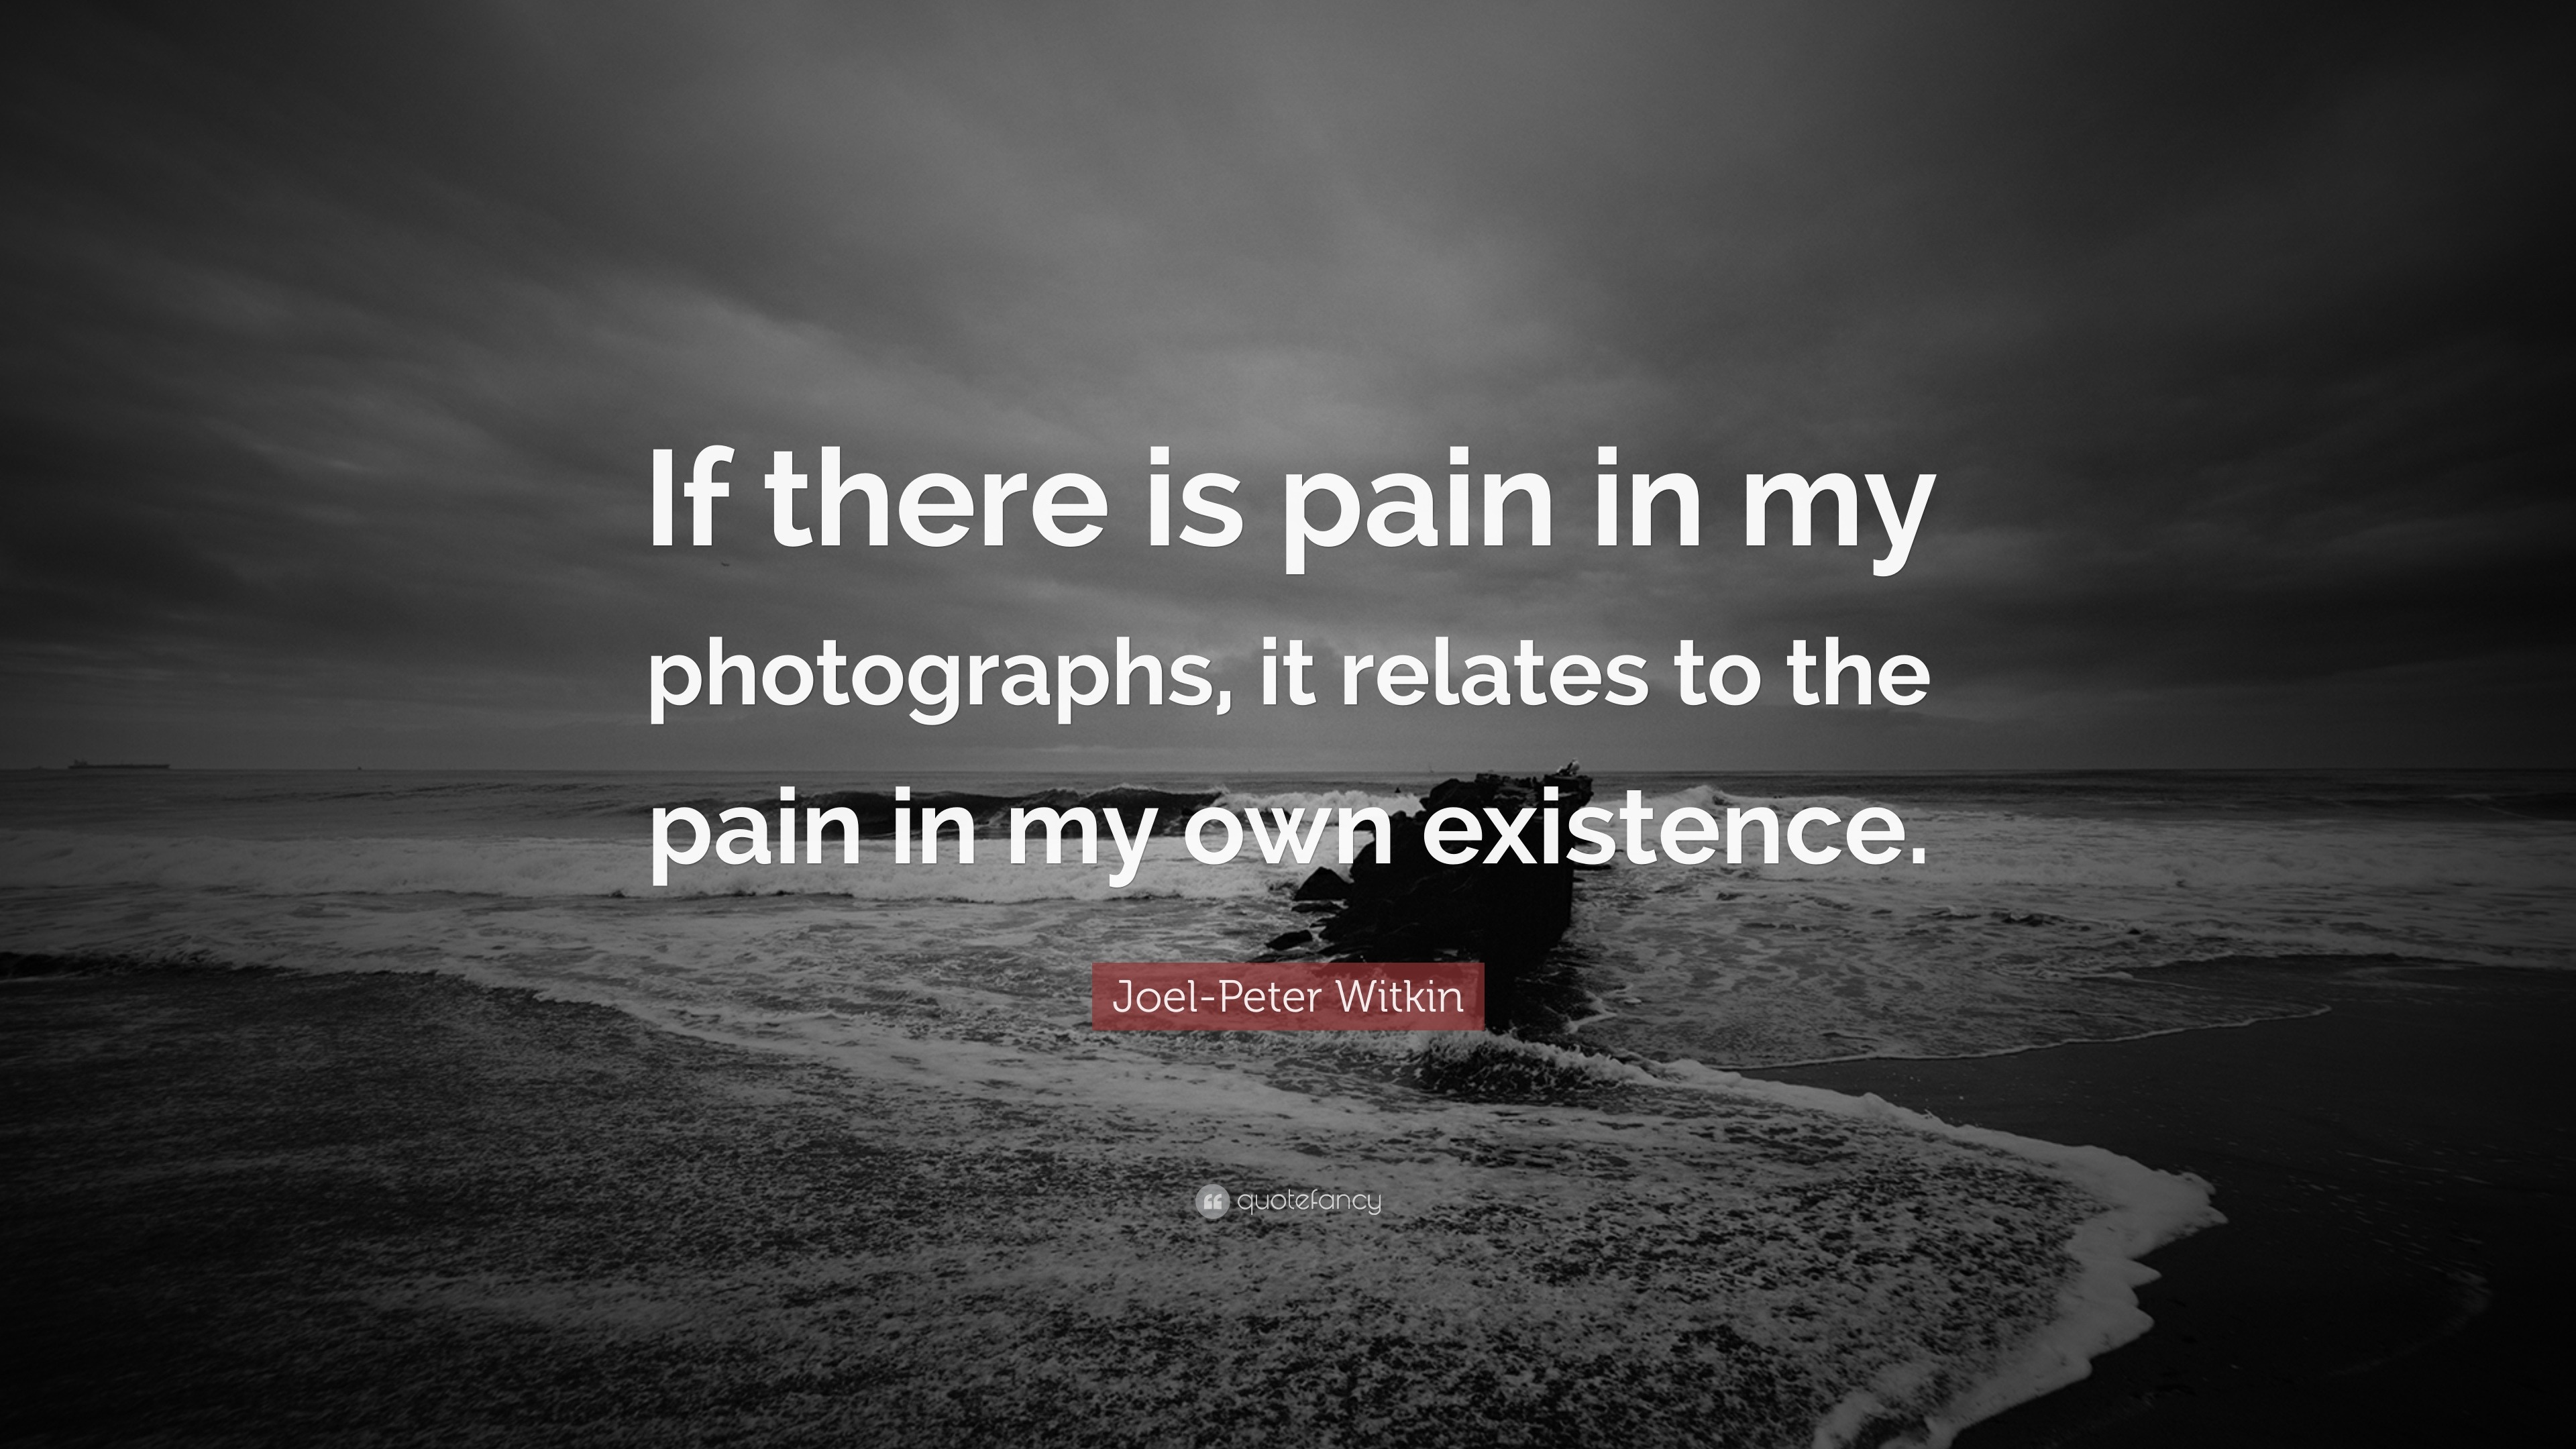 JoelPeter Witkin Quotes (12 wallpapers) Quotefancy